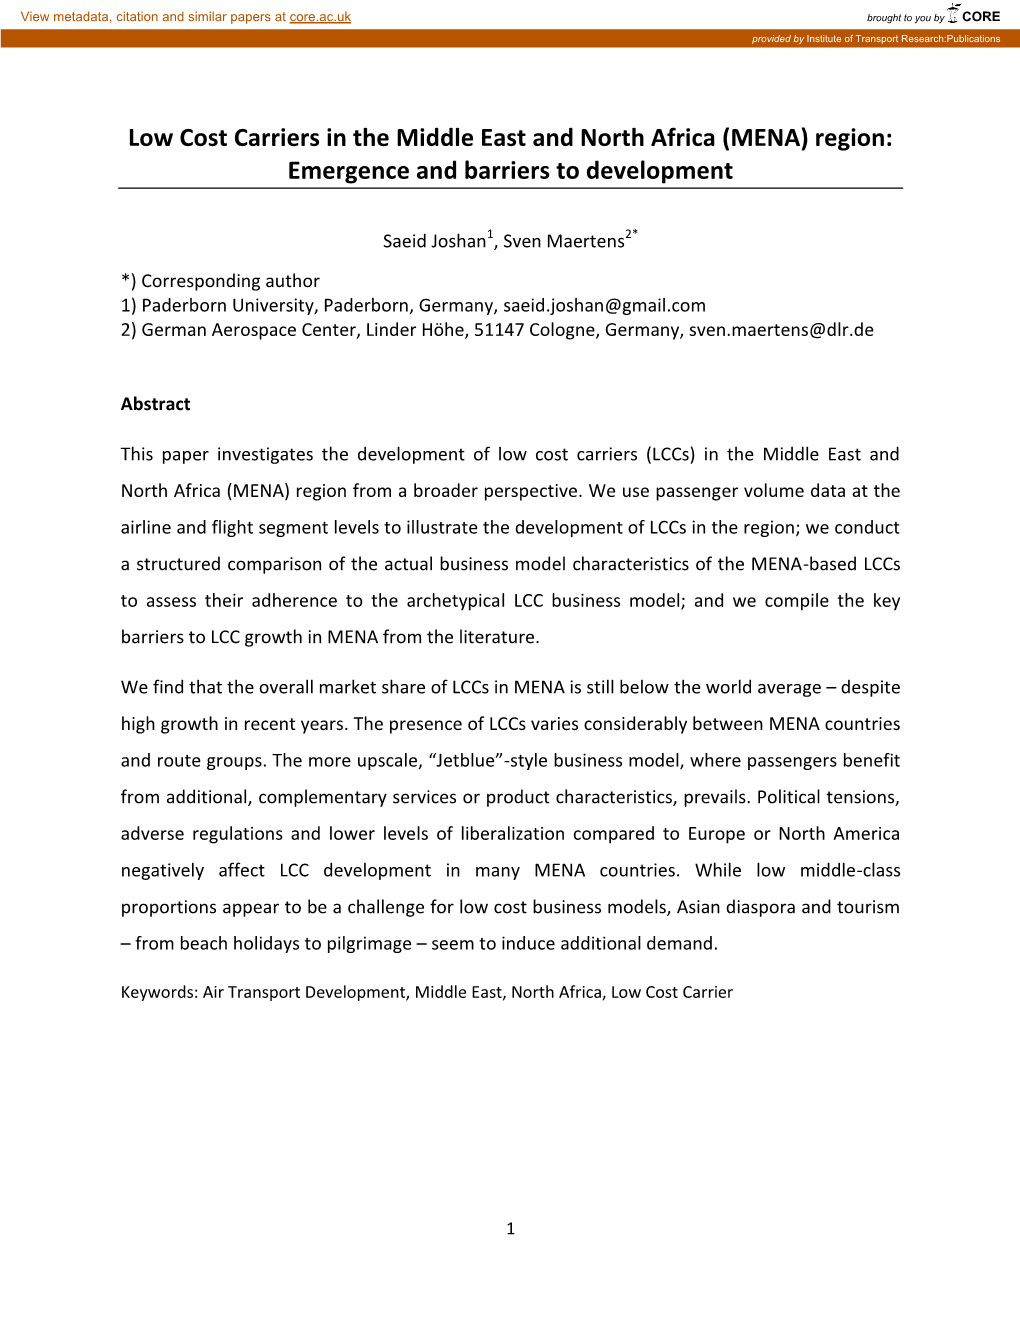 (MENA) Region: Emergence and Barriers to Development